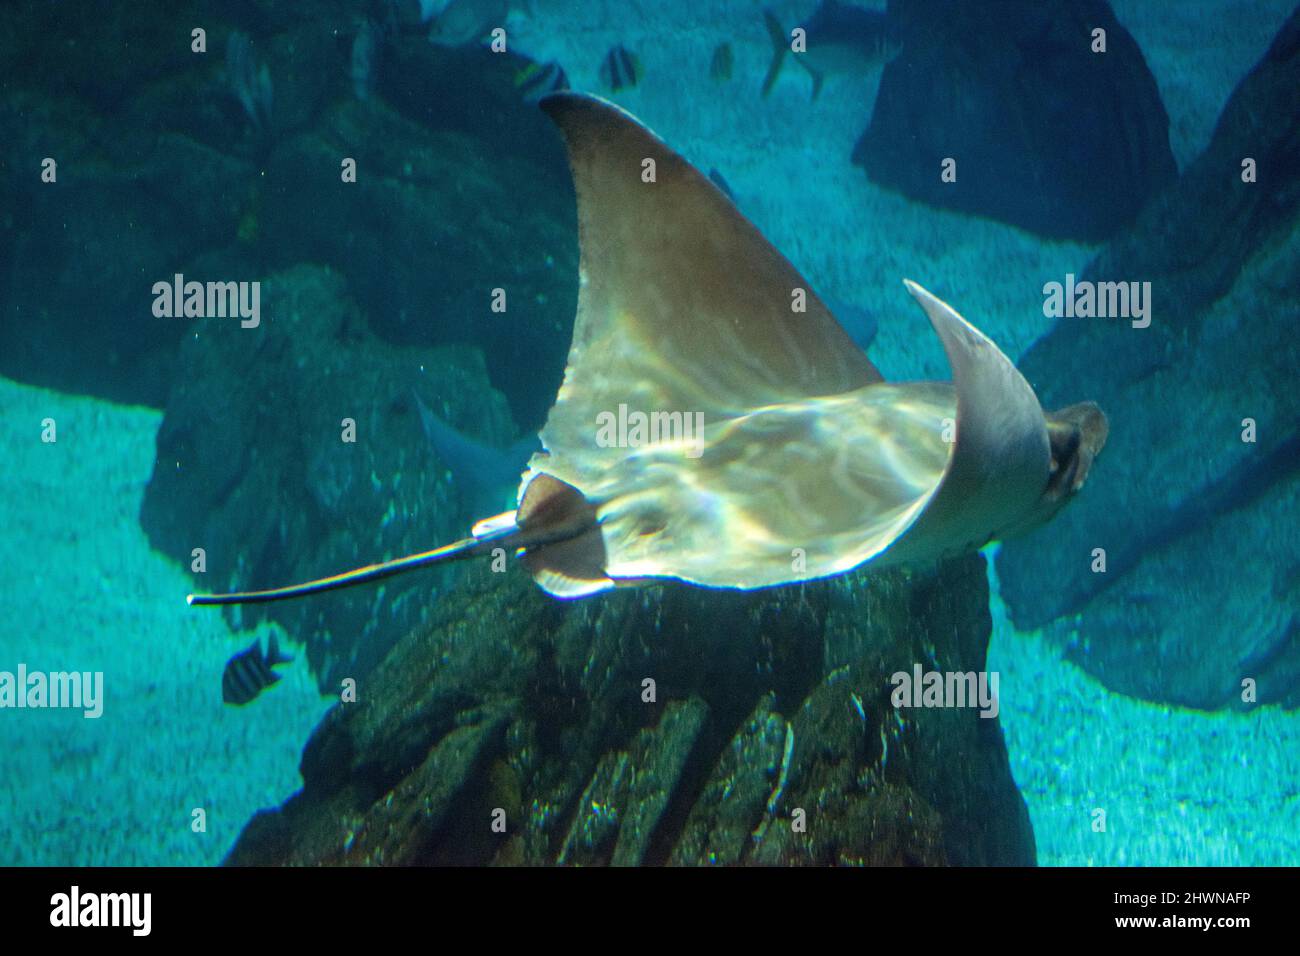 Aetomylaeus bovinus, also known as the bull ray, a species of large stingray of the family Myliobatidae found around the coasts of Europe and Africa. Stock Photo